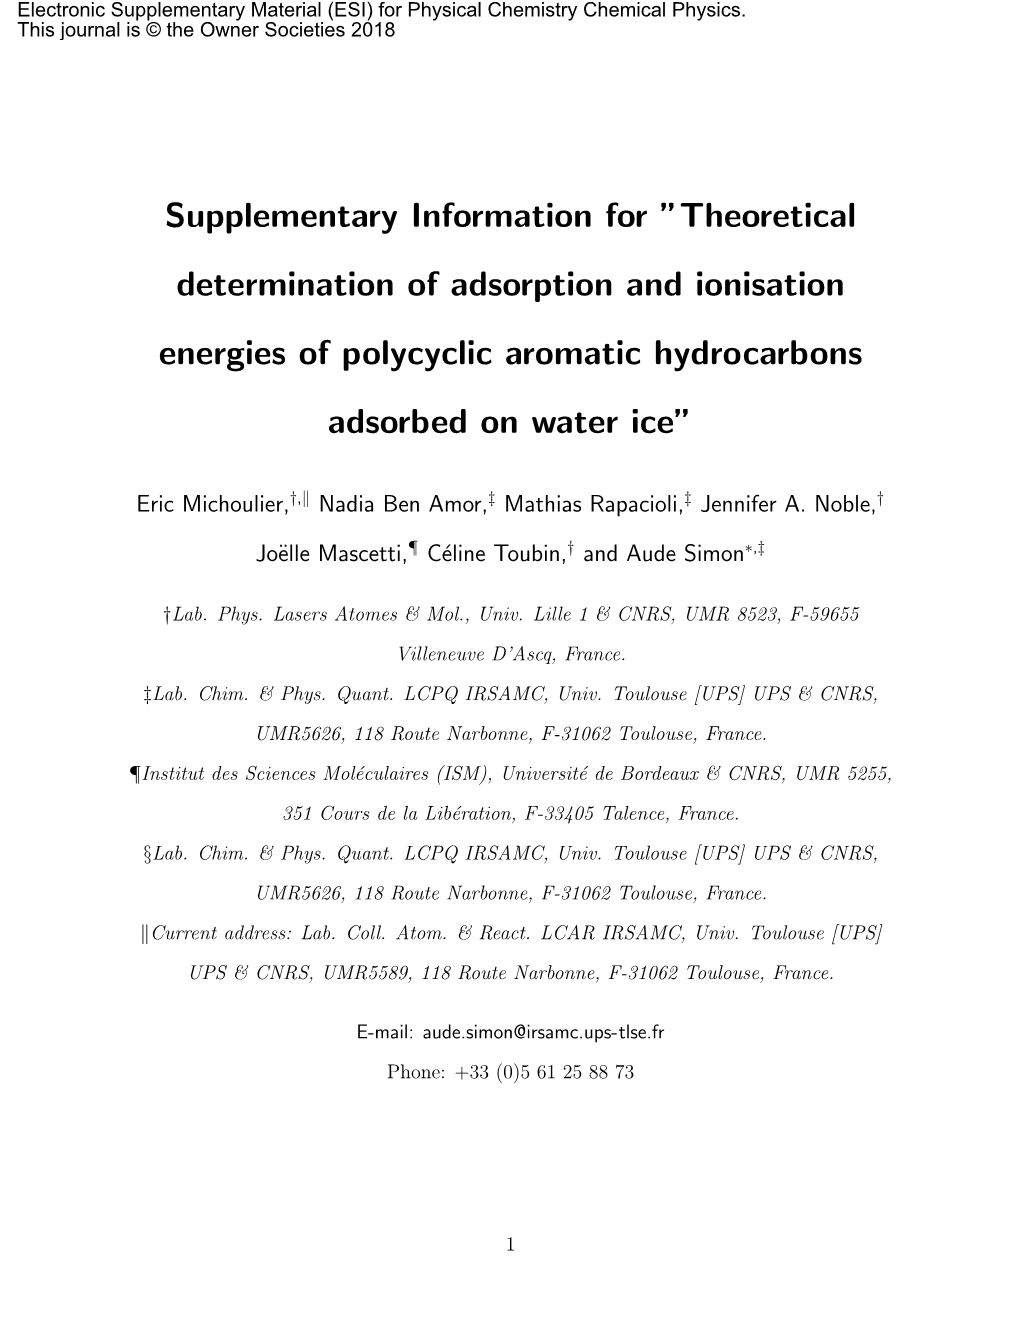 Supplementary Information for ”Theoretical Determination of Adsorption and Ionisation Energies of Polycyclic Aromatic Hydrocarbons Adsorbed on Water Ice”